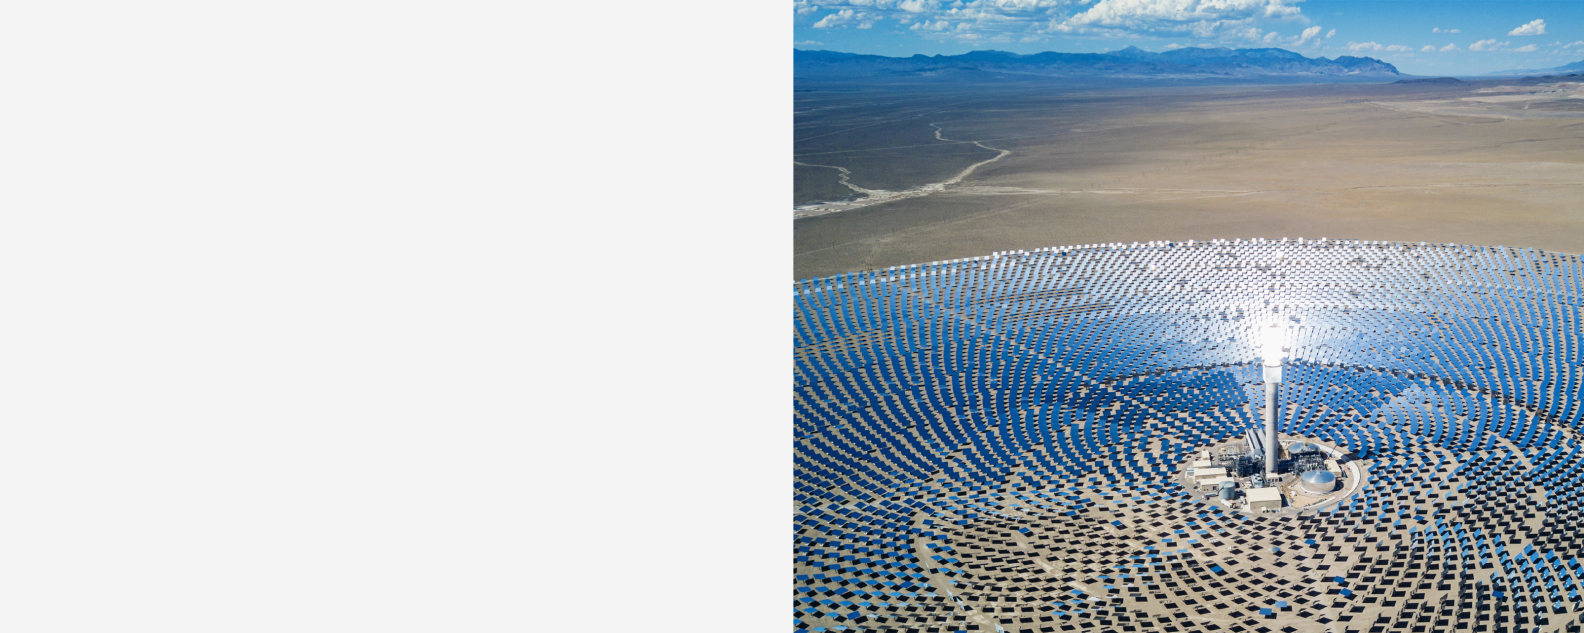 High aerial view of large solar thermal power plant farm in the desert